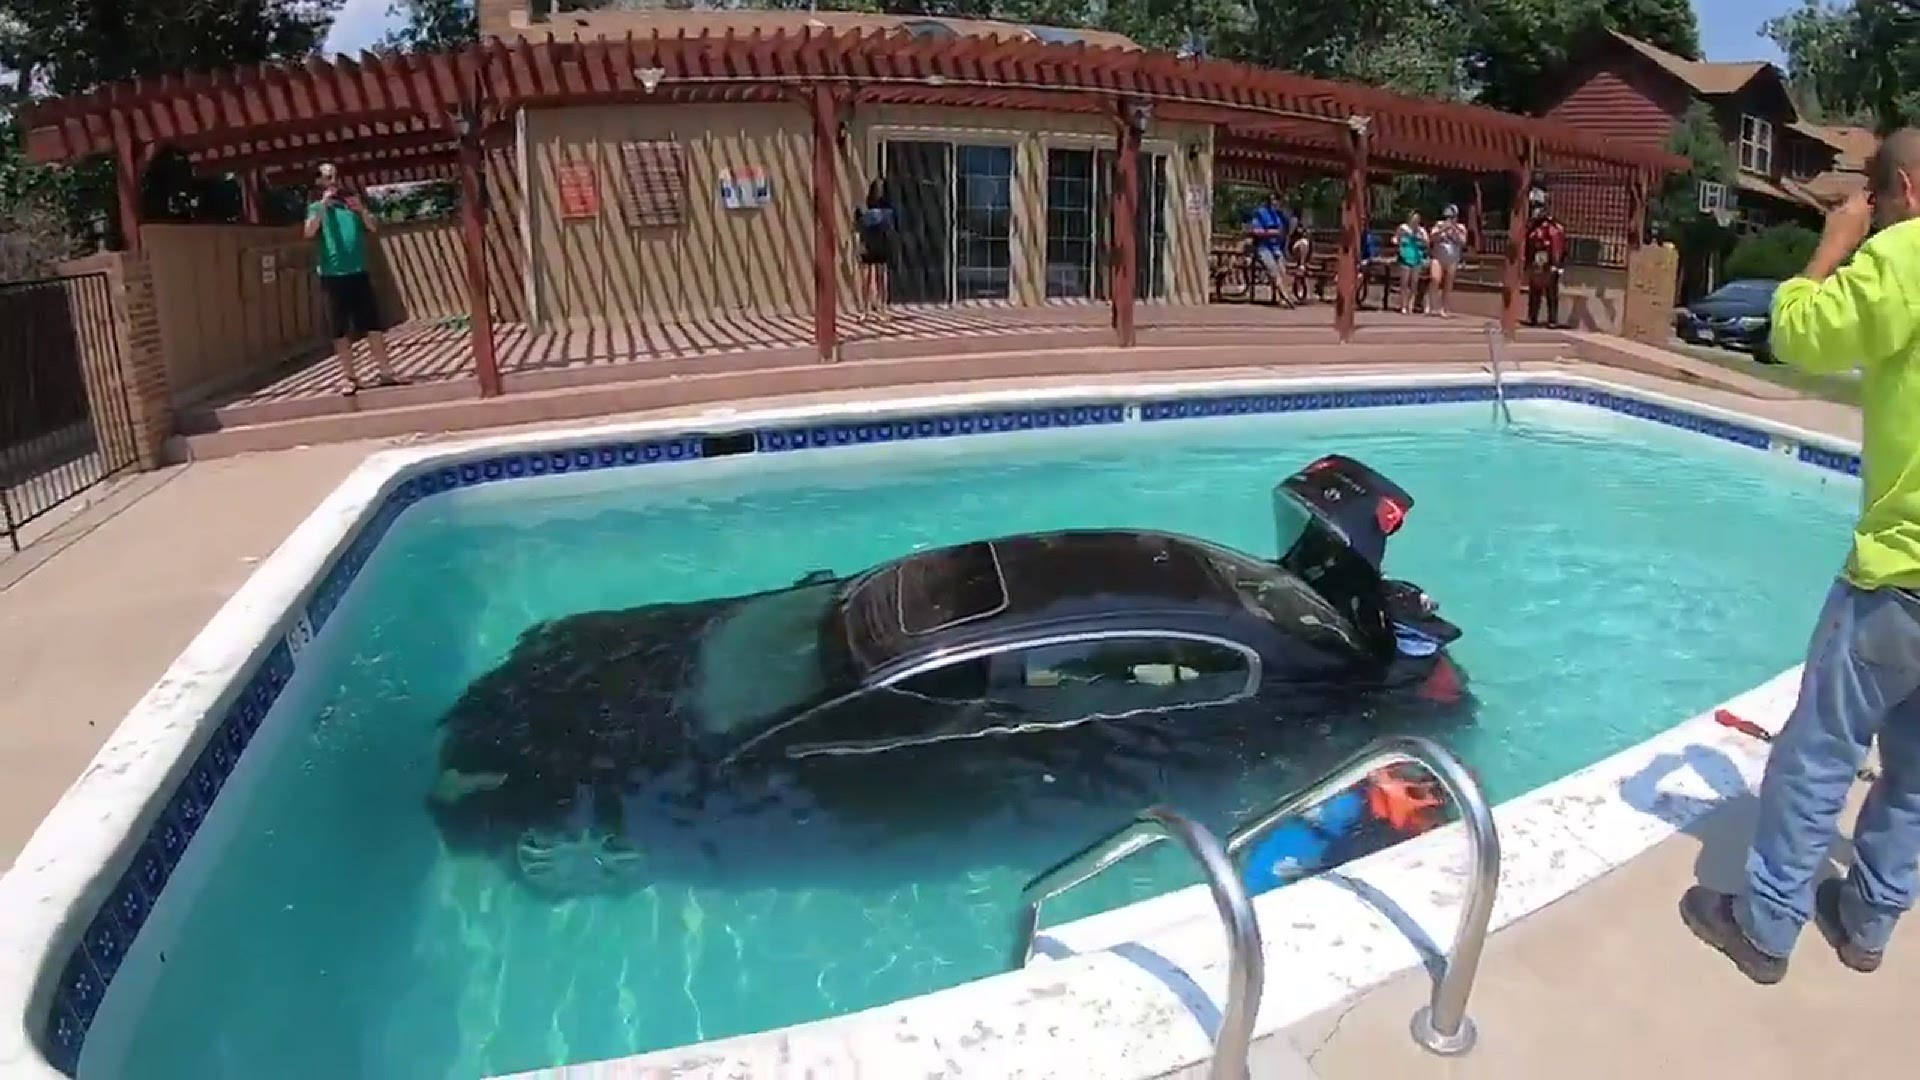 Lakewood Police said the car backed into the pool after the teen driver accidentally put it in reverse.